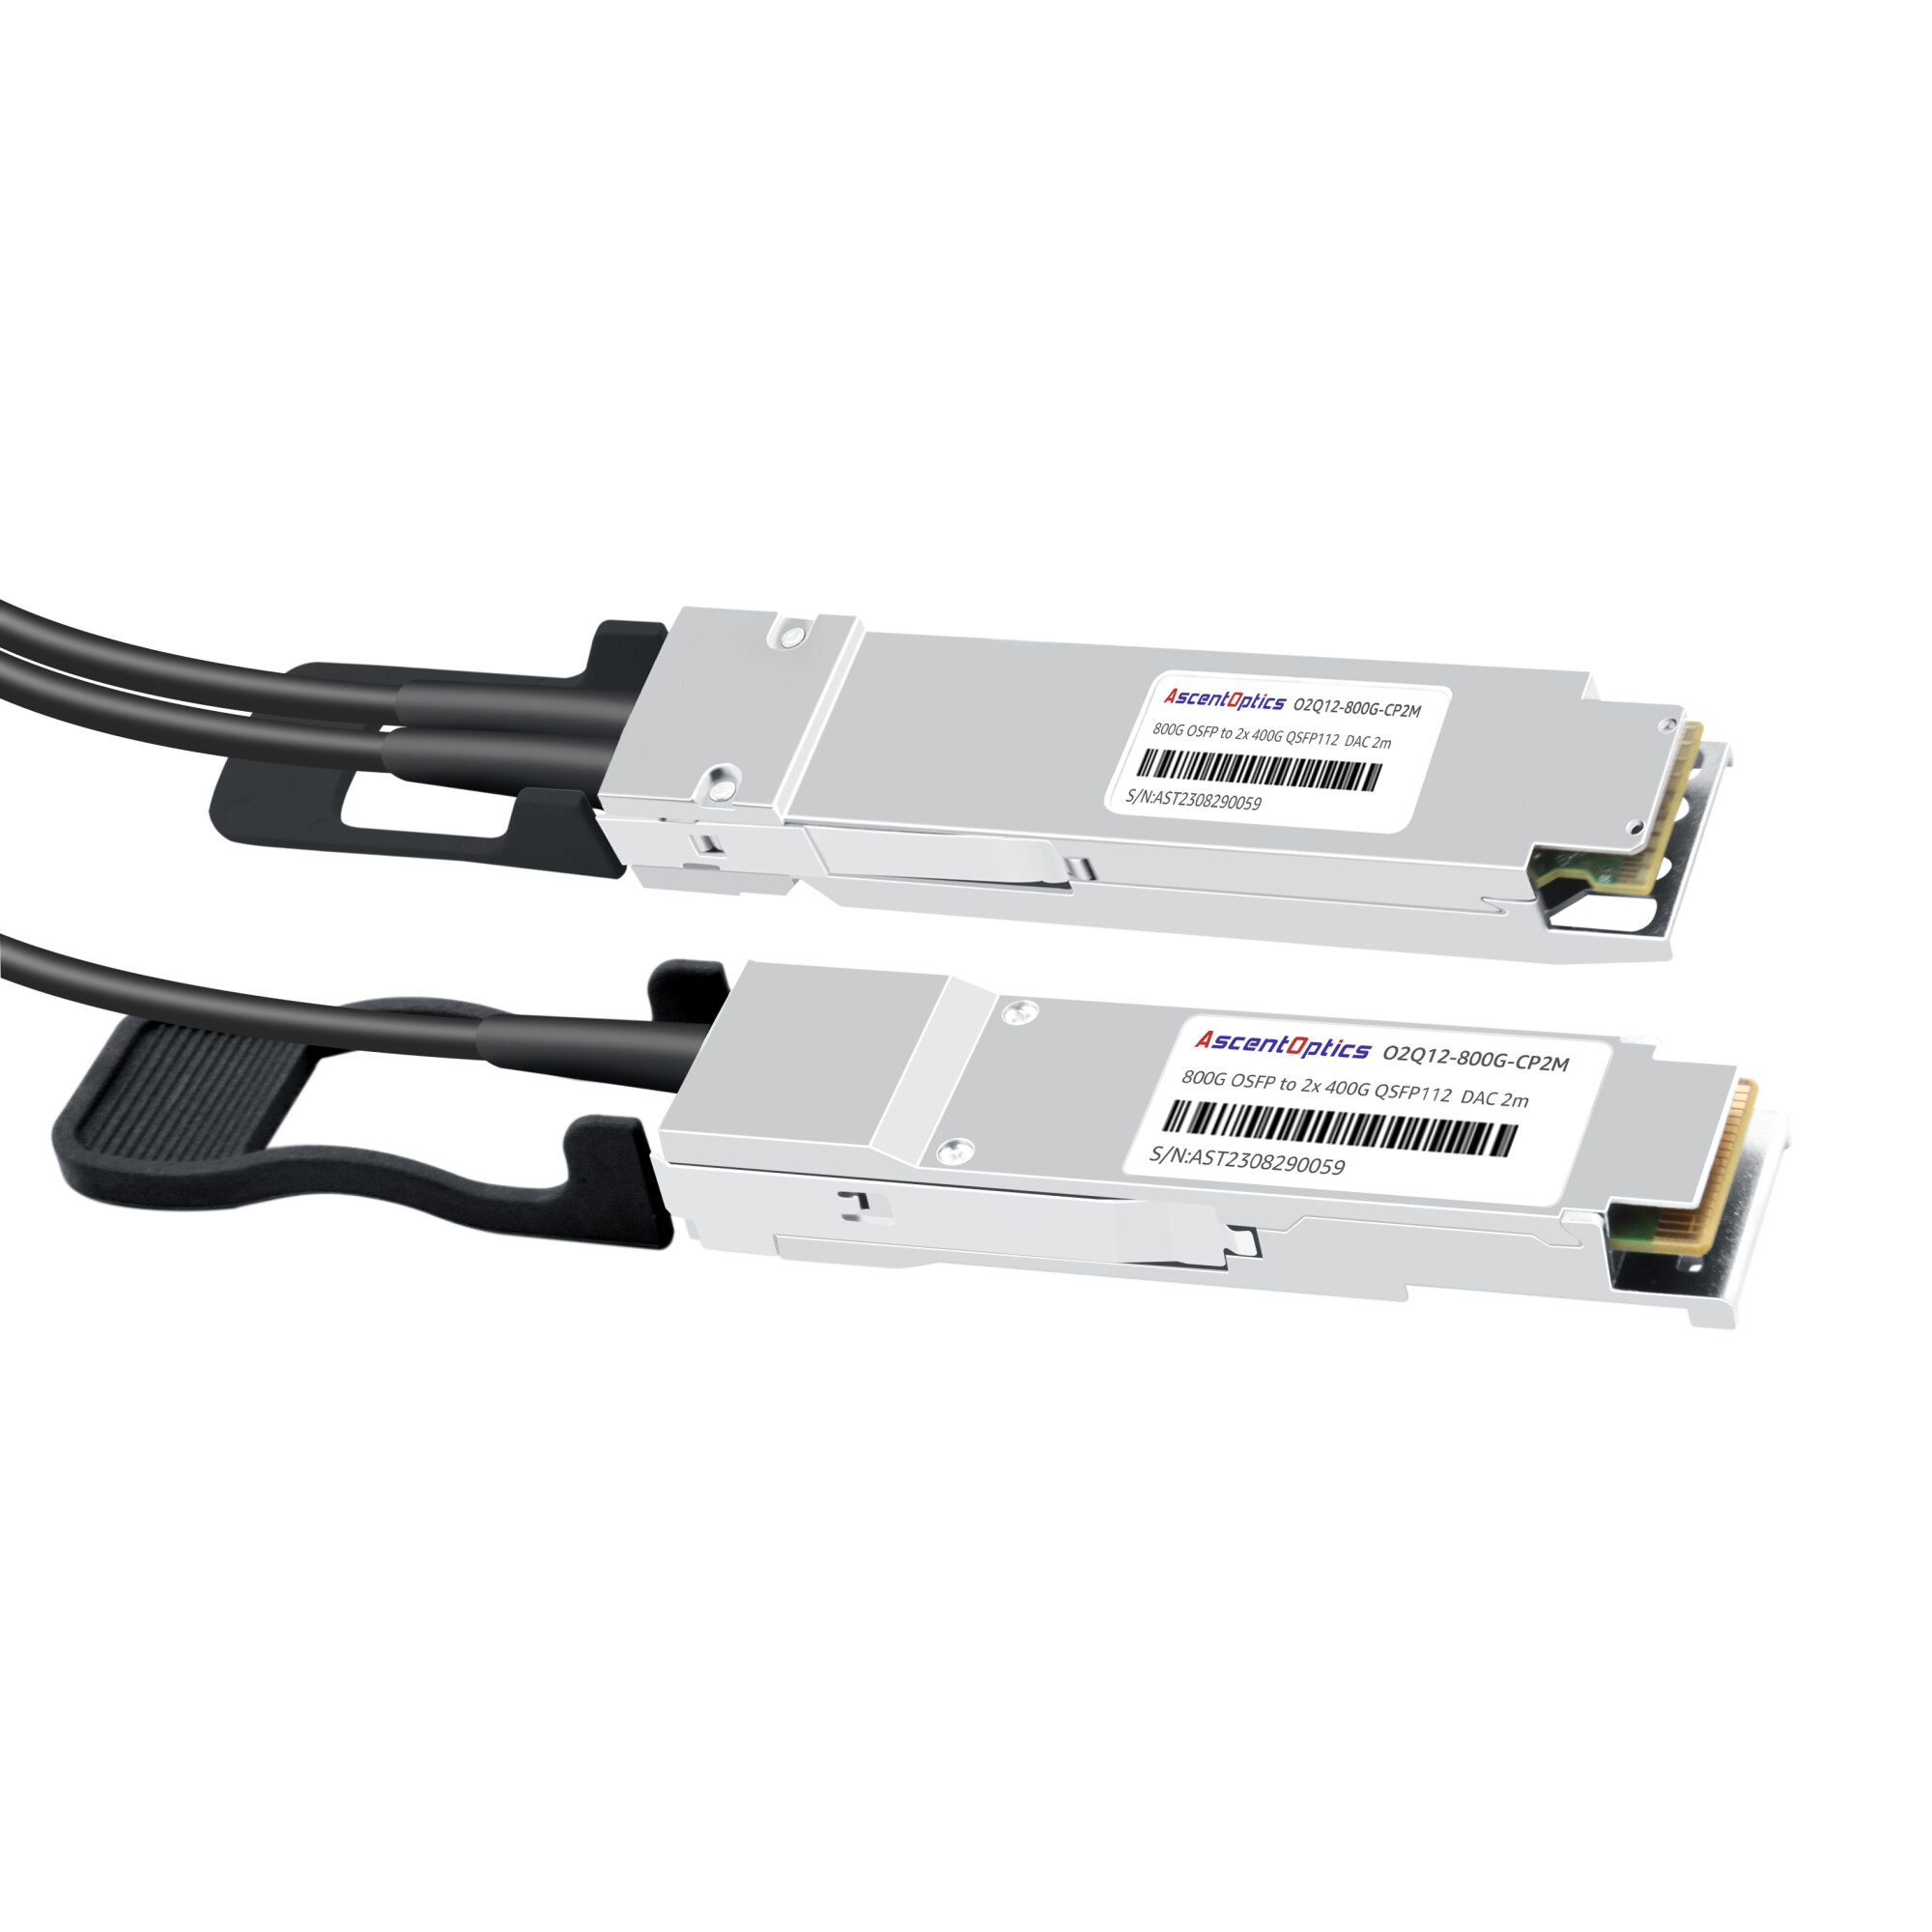 800G OSFP to 2x 400G QSFP112 Copper Breakout Cable,2 Meter